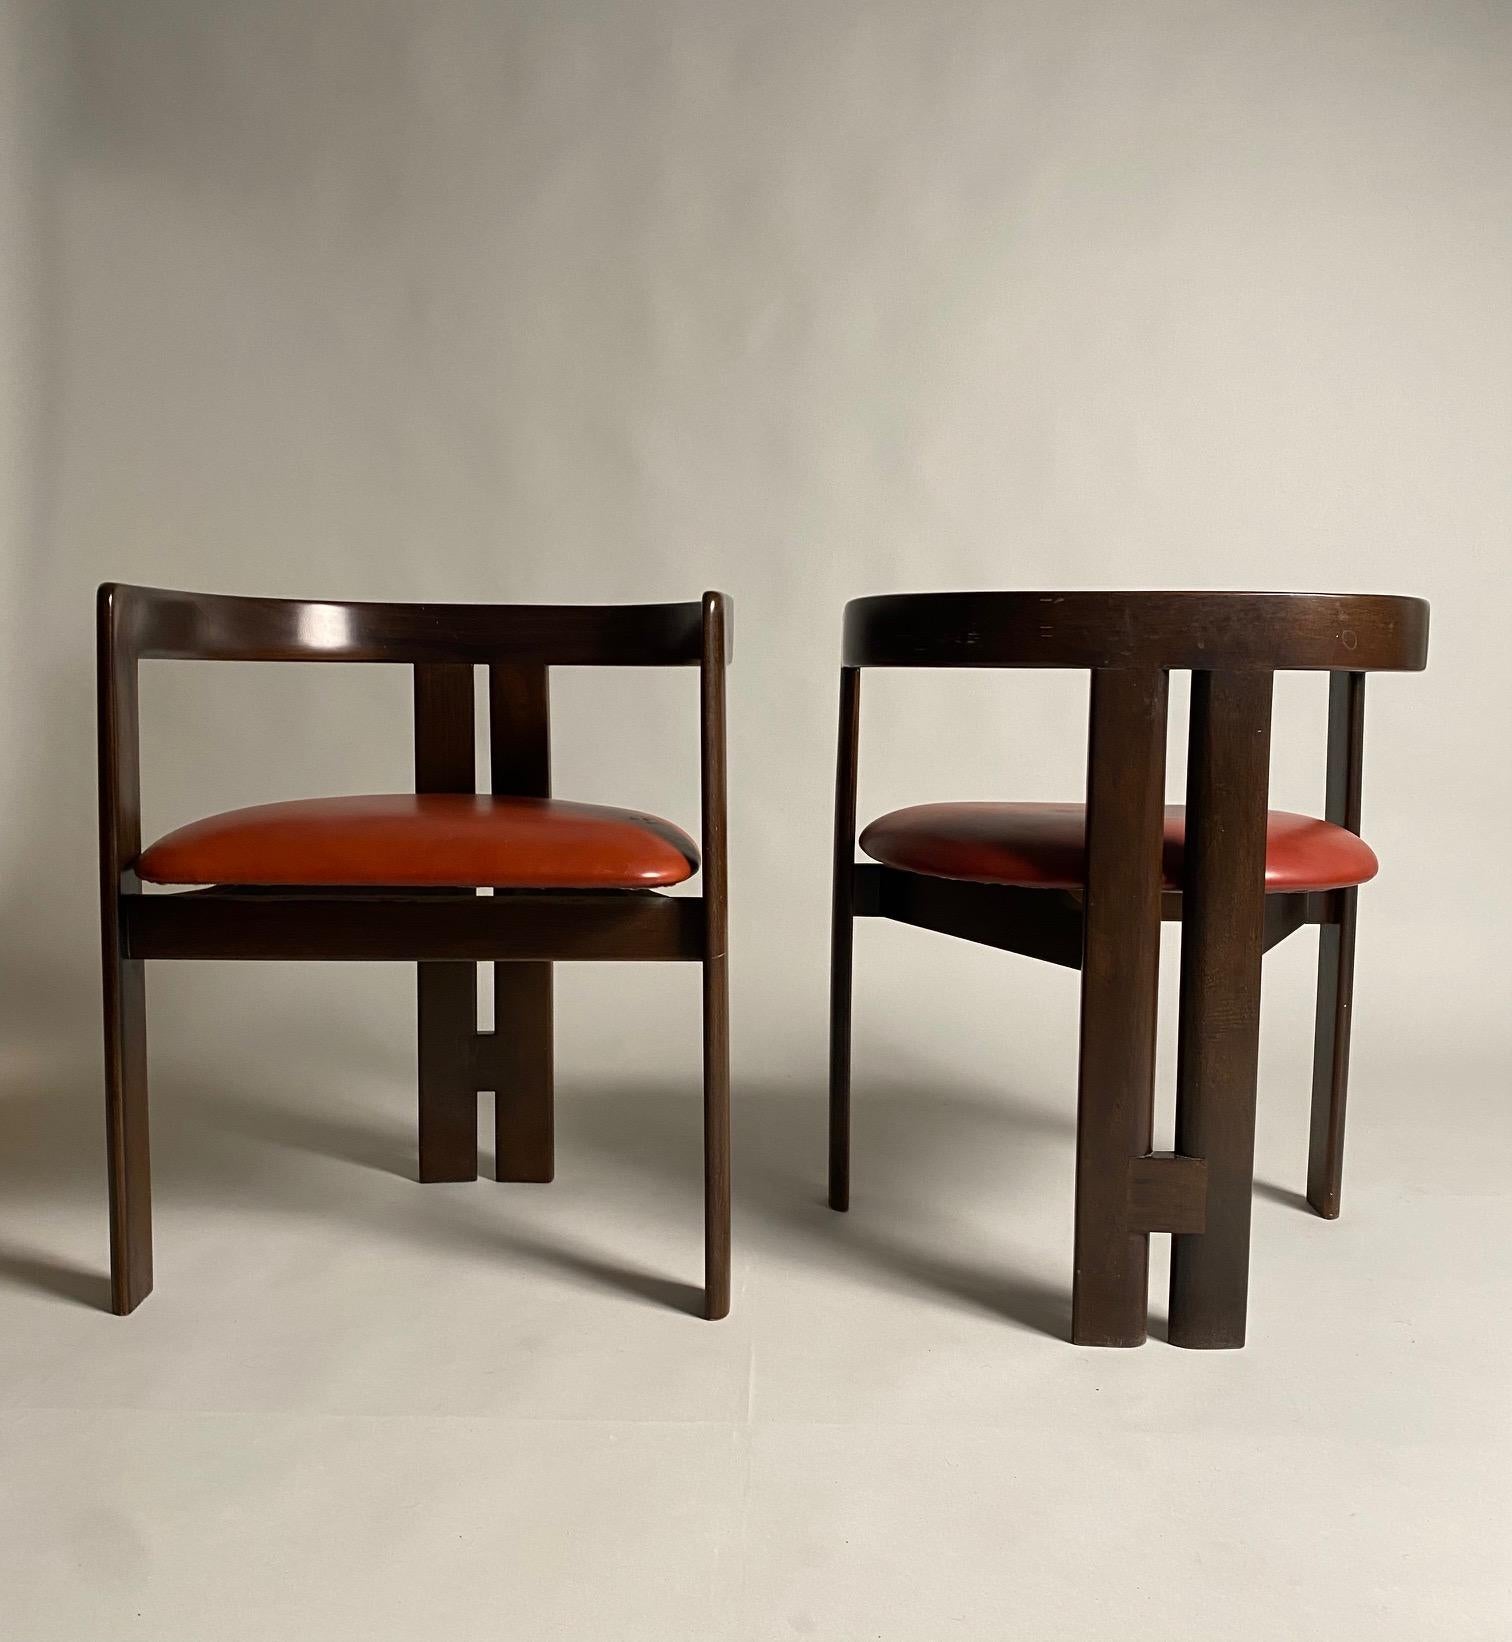 Mid-20th Century Tobia Scarpa, two Pigreco wooden chairs for Gavina, set of two (1959)